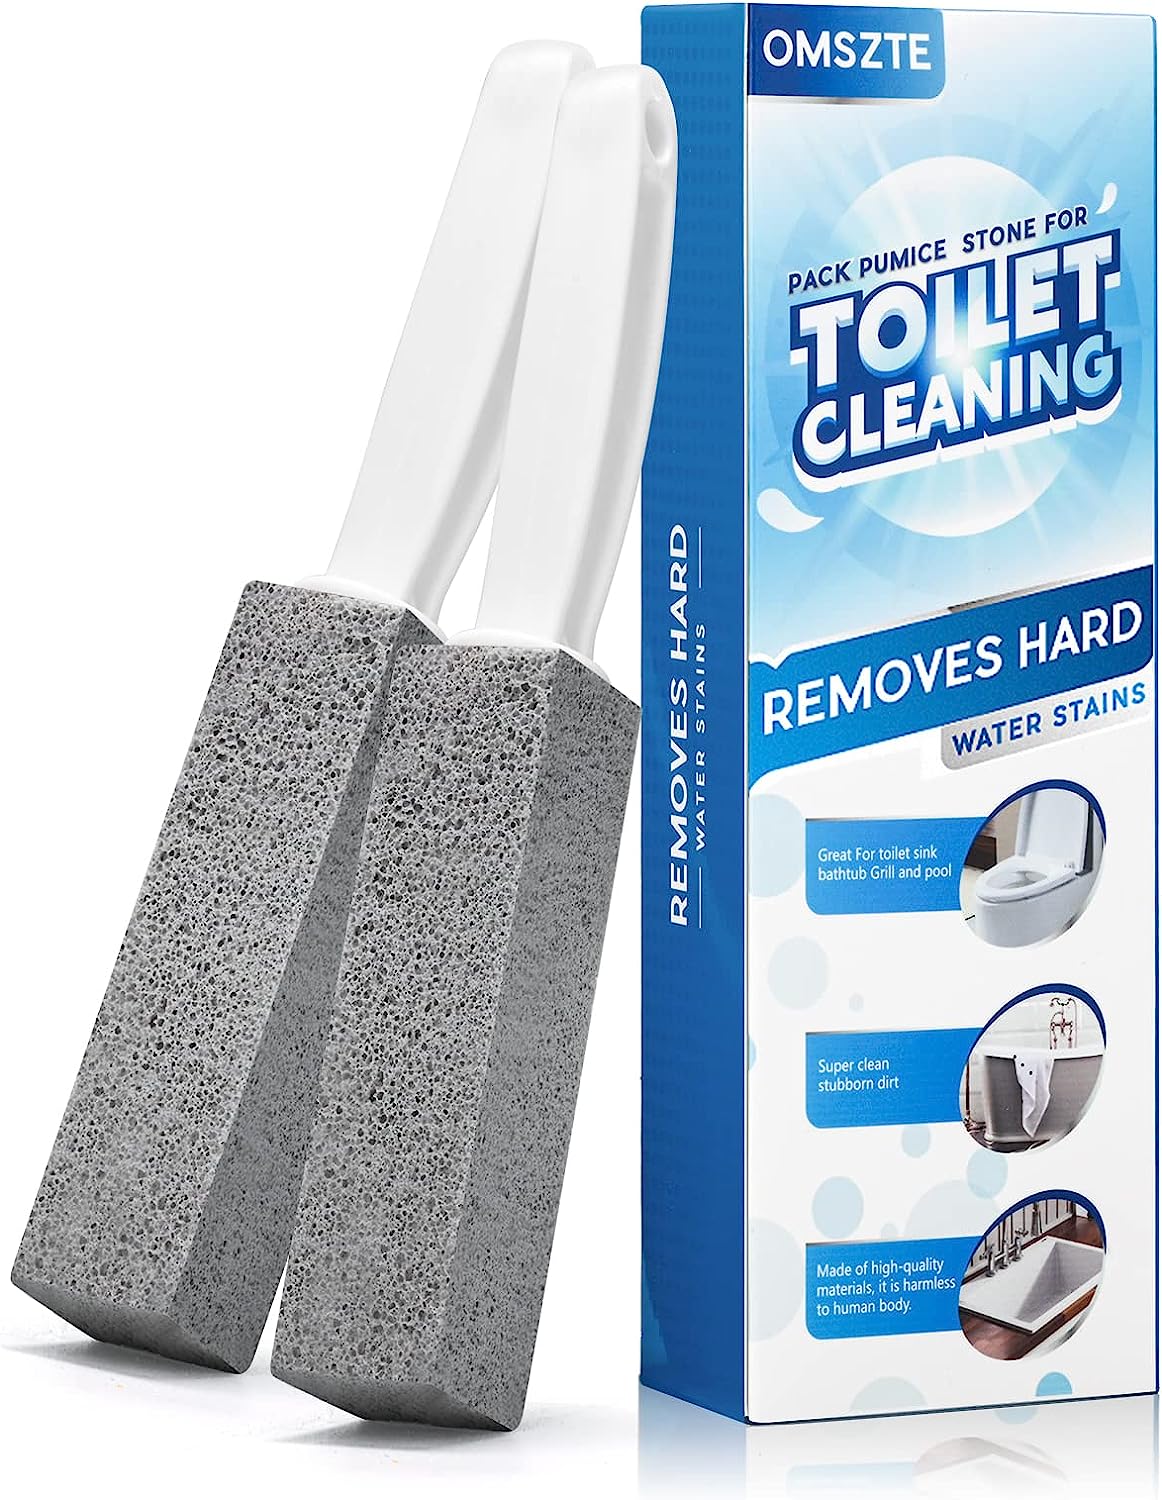 2Pack Pumice Stone Toilet Bowl Cleaner with [...]